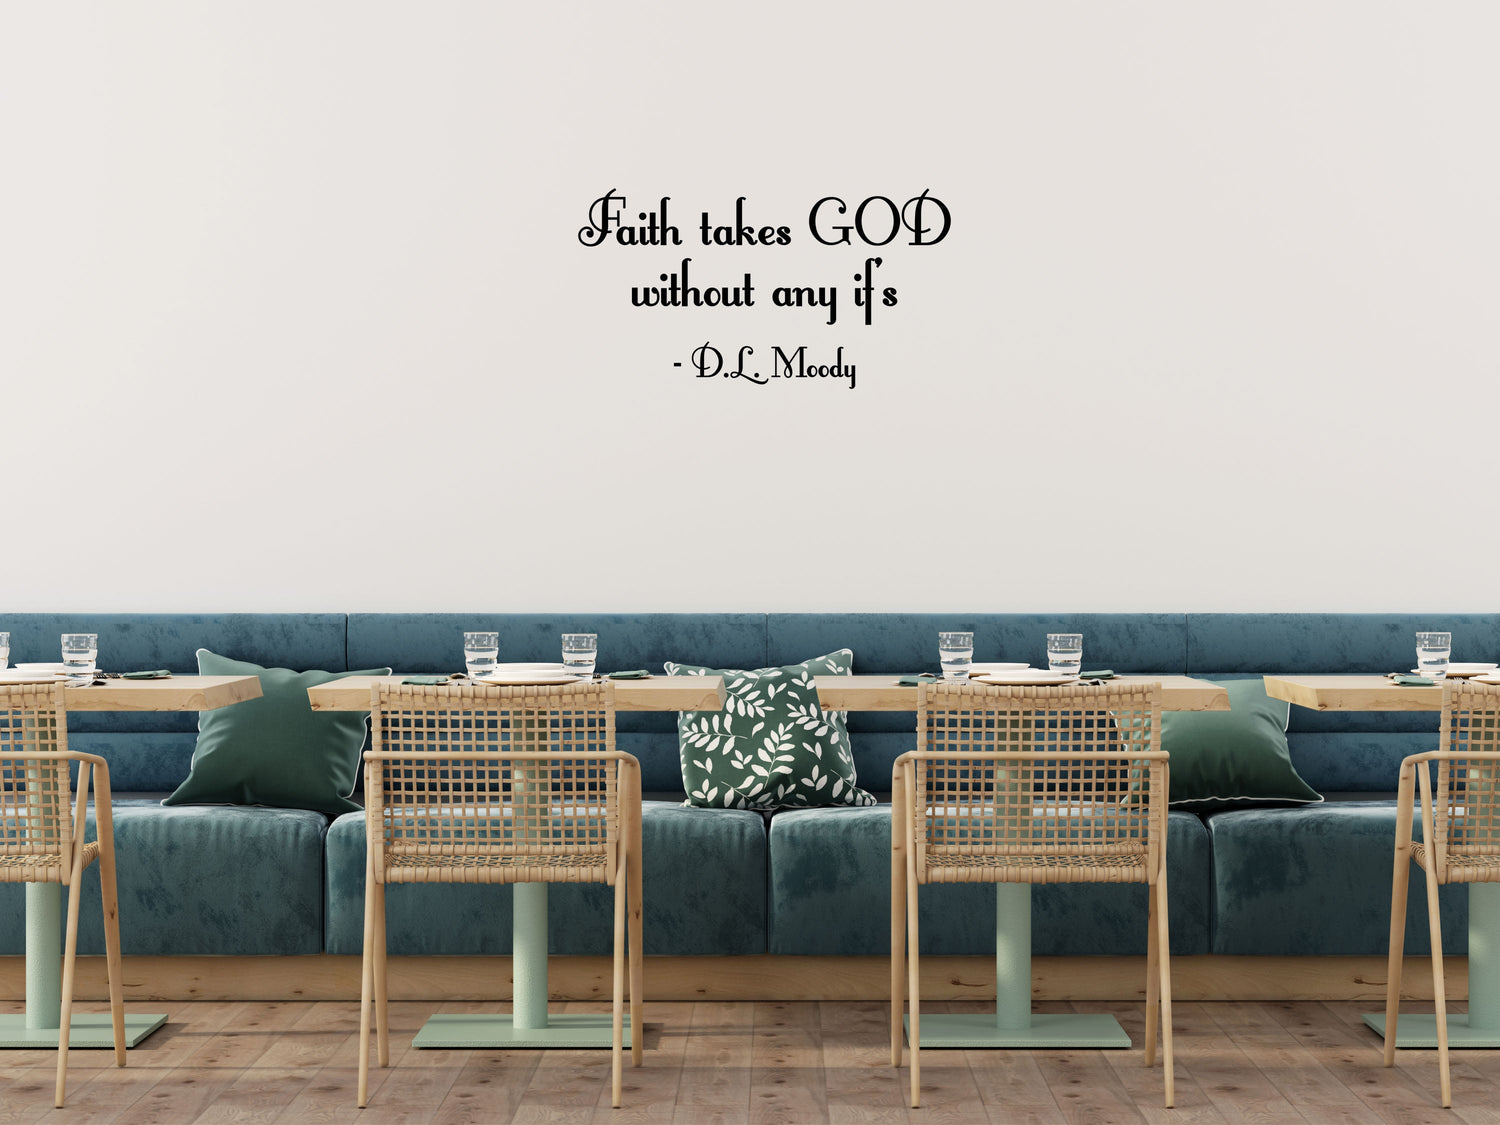 Faith Takes God Vinyl Wall Decal D.L. Moody - Bedroom Wall Decal - Religious Wall Decal - Christian Wall Sign - Master Bedroom Decal Vinyl Wall Decal Inspirational Wall Signs 